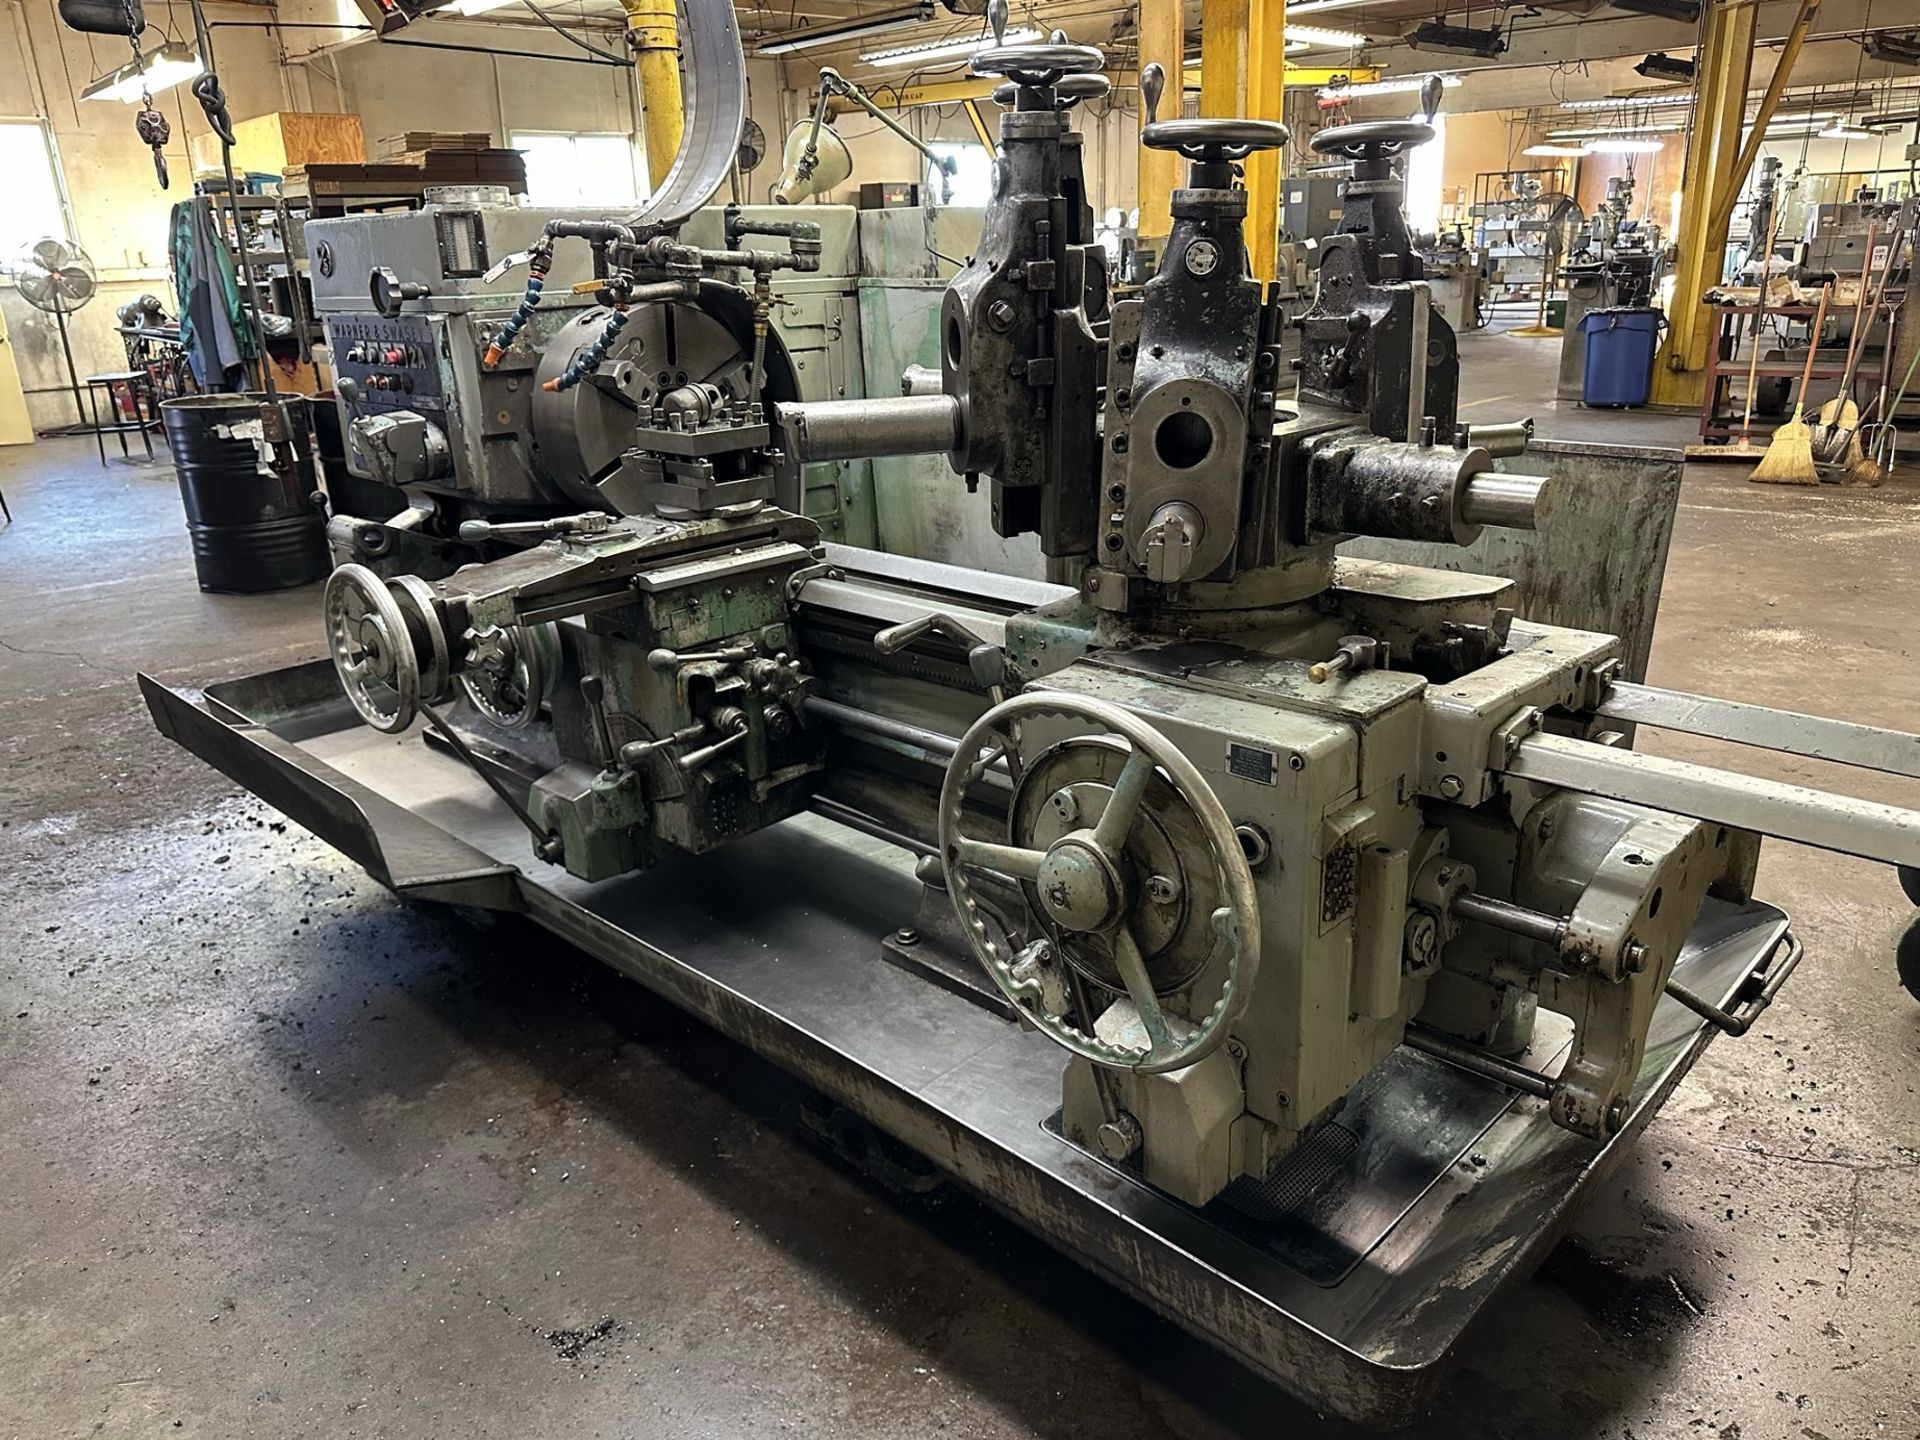 WARNER & SWASEY 2A M-3470 TURRET LATHE, 40 HP, 4-3/4" THROUGH HOLE, S/N 2289922, 18" 3-JAW CHUCK